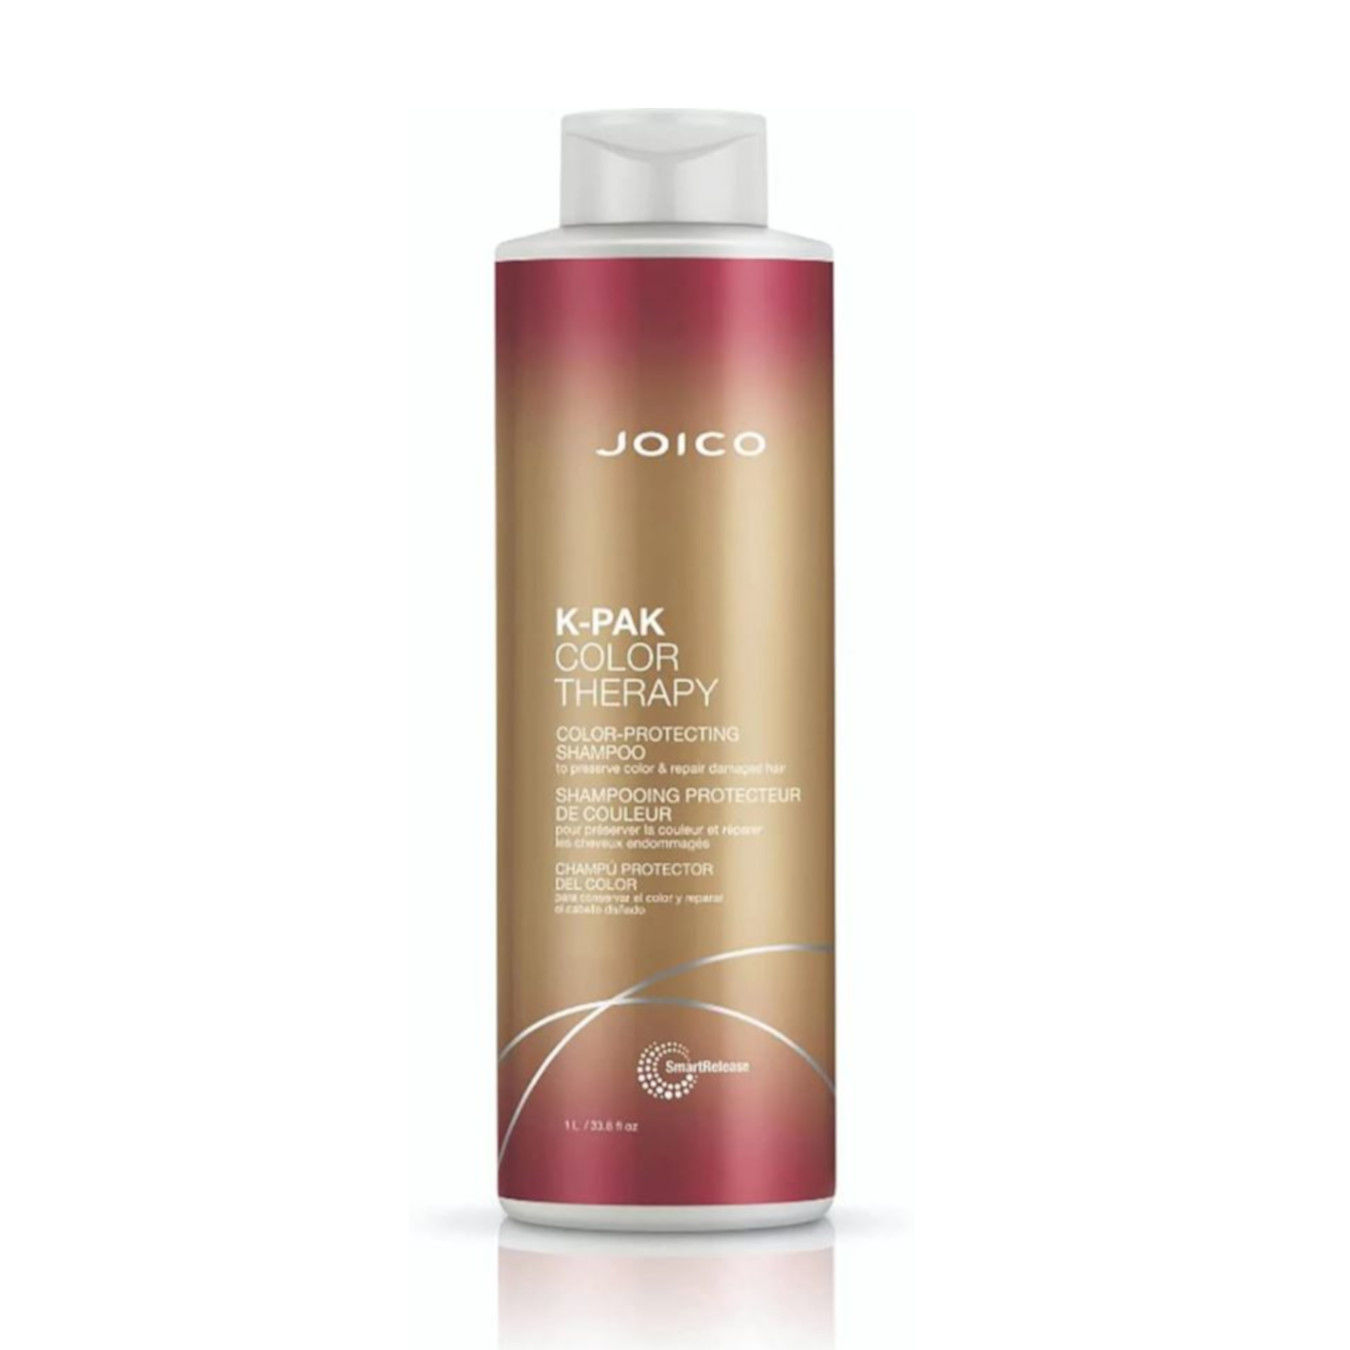 JOICO K-Pak Color Therapy Color-Protecting Shampoo